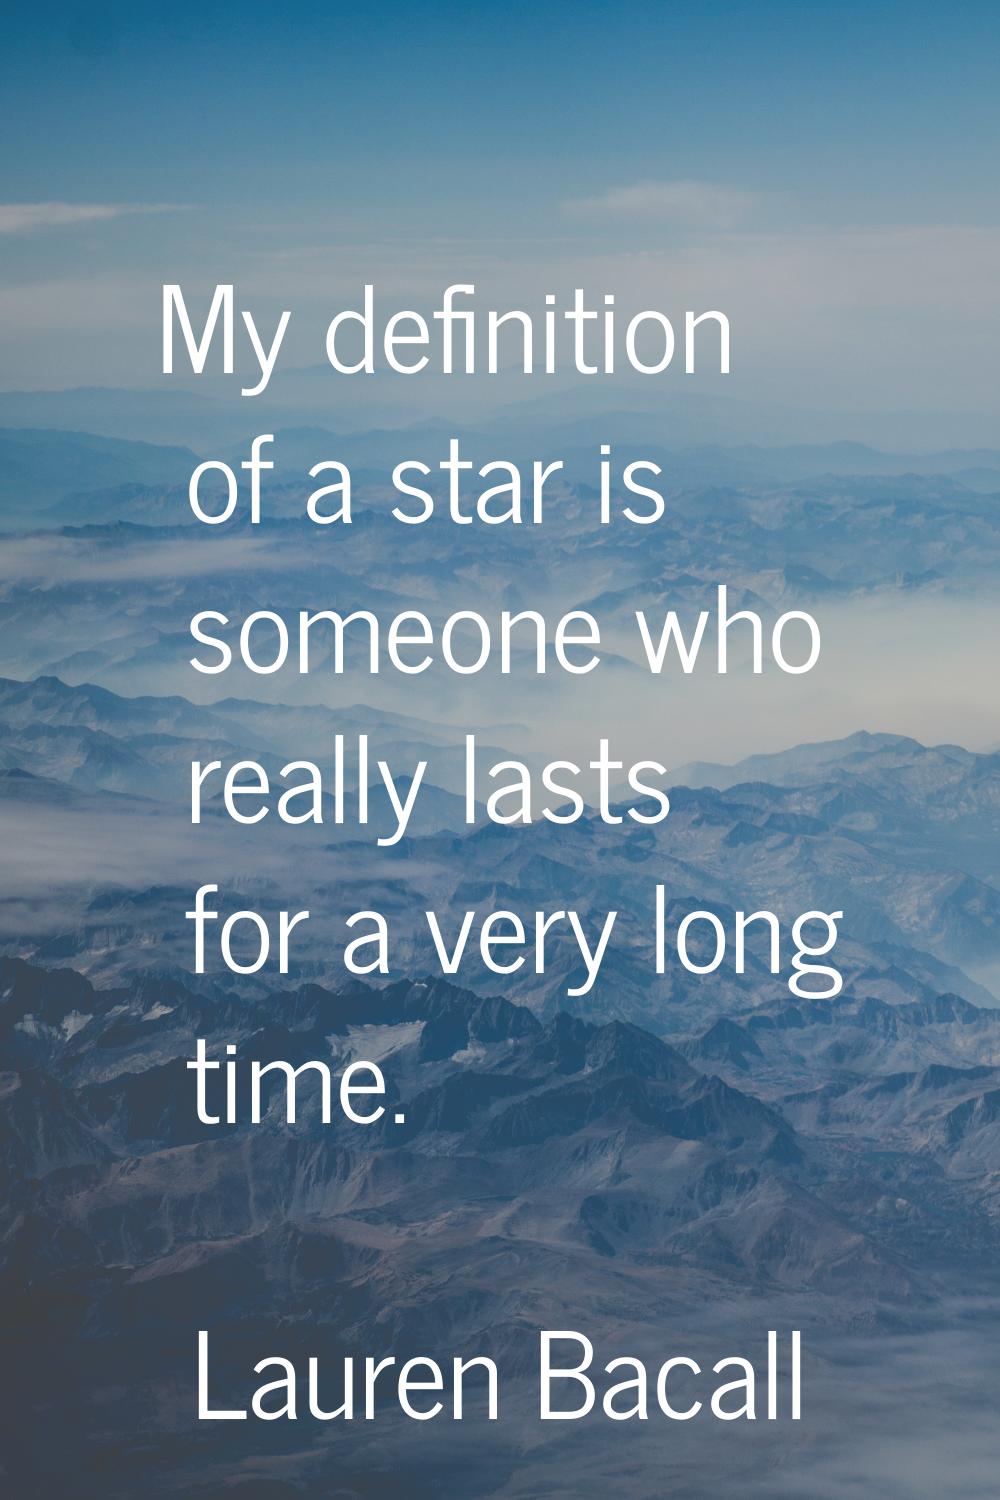 My definition of a star is someone who really lasts for a very long time.